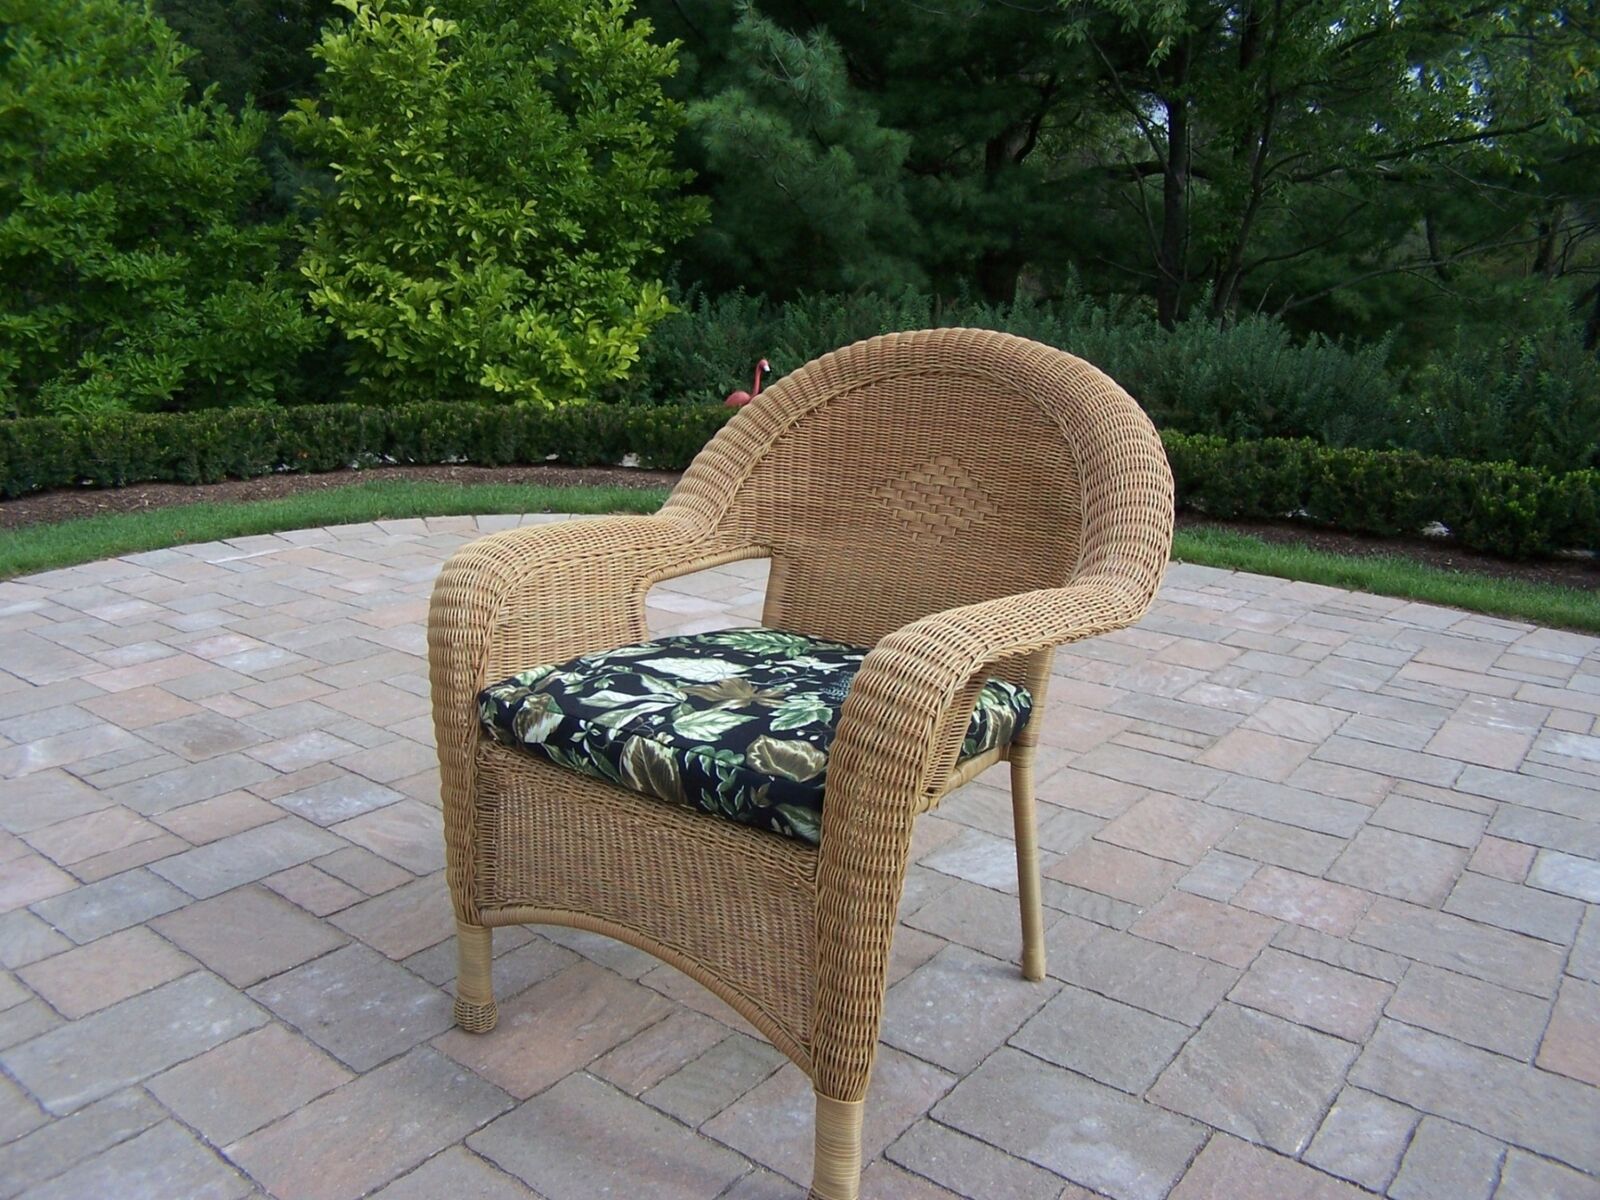 Outdoor Living and Style Pack of 2 Honey Brown Outdoor Patio Resin Wicker Armchairs - Blue Cushions - image 2 of 2